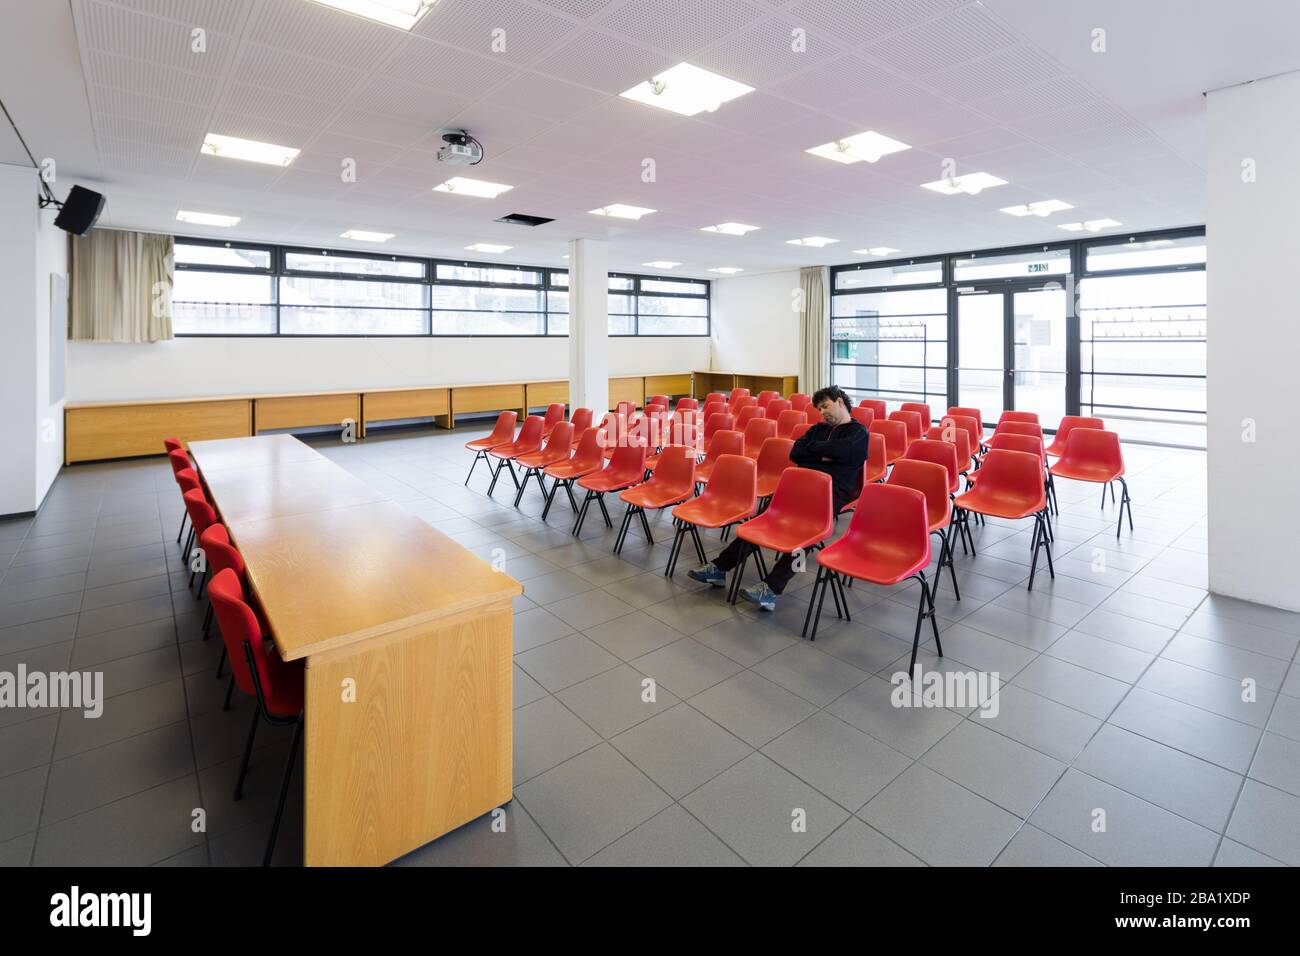 Lonely man in the conference room with red chairs Stock Photo